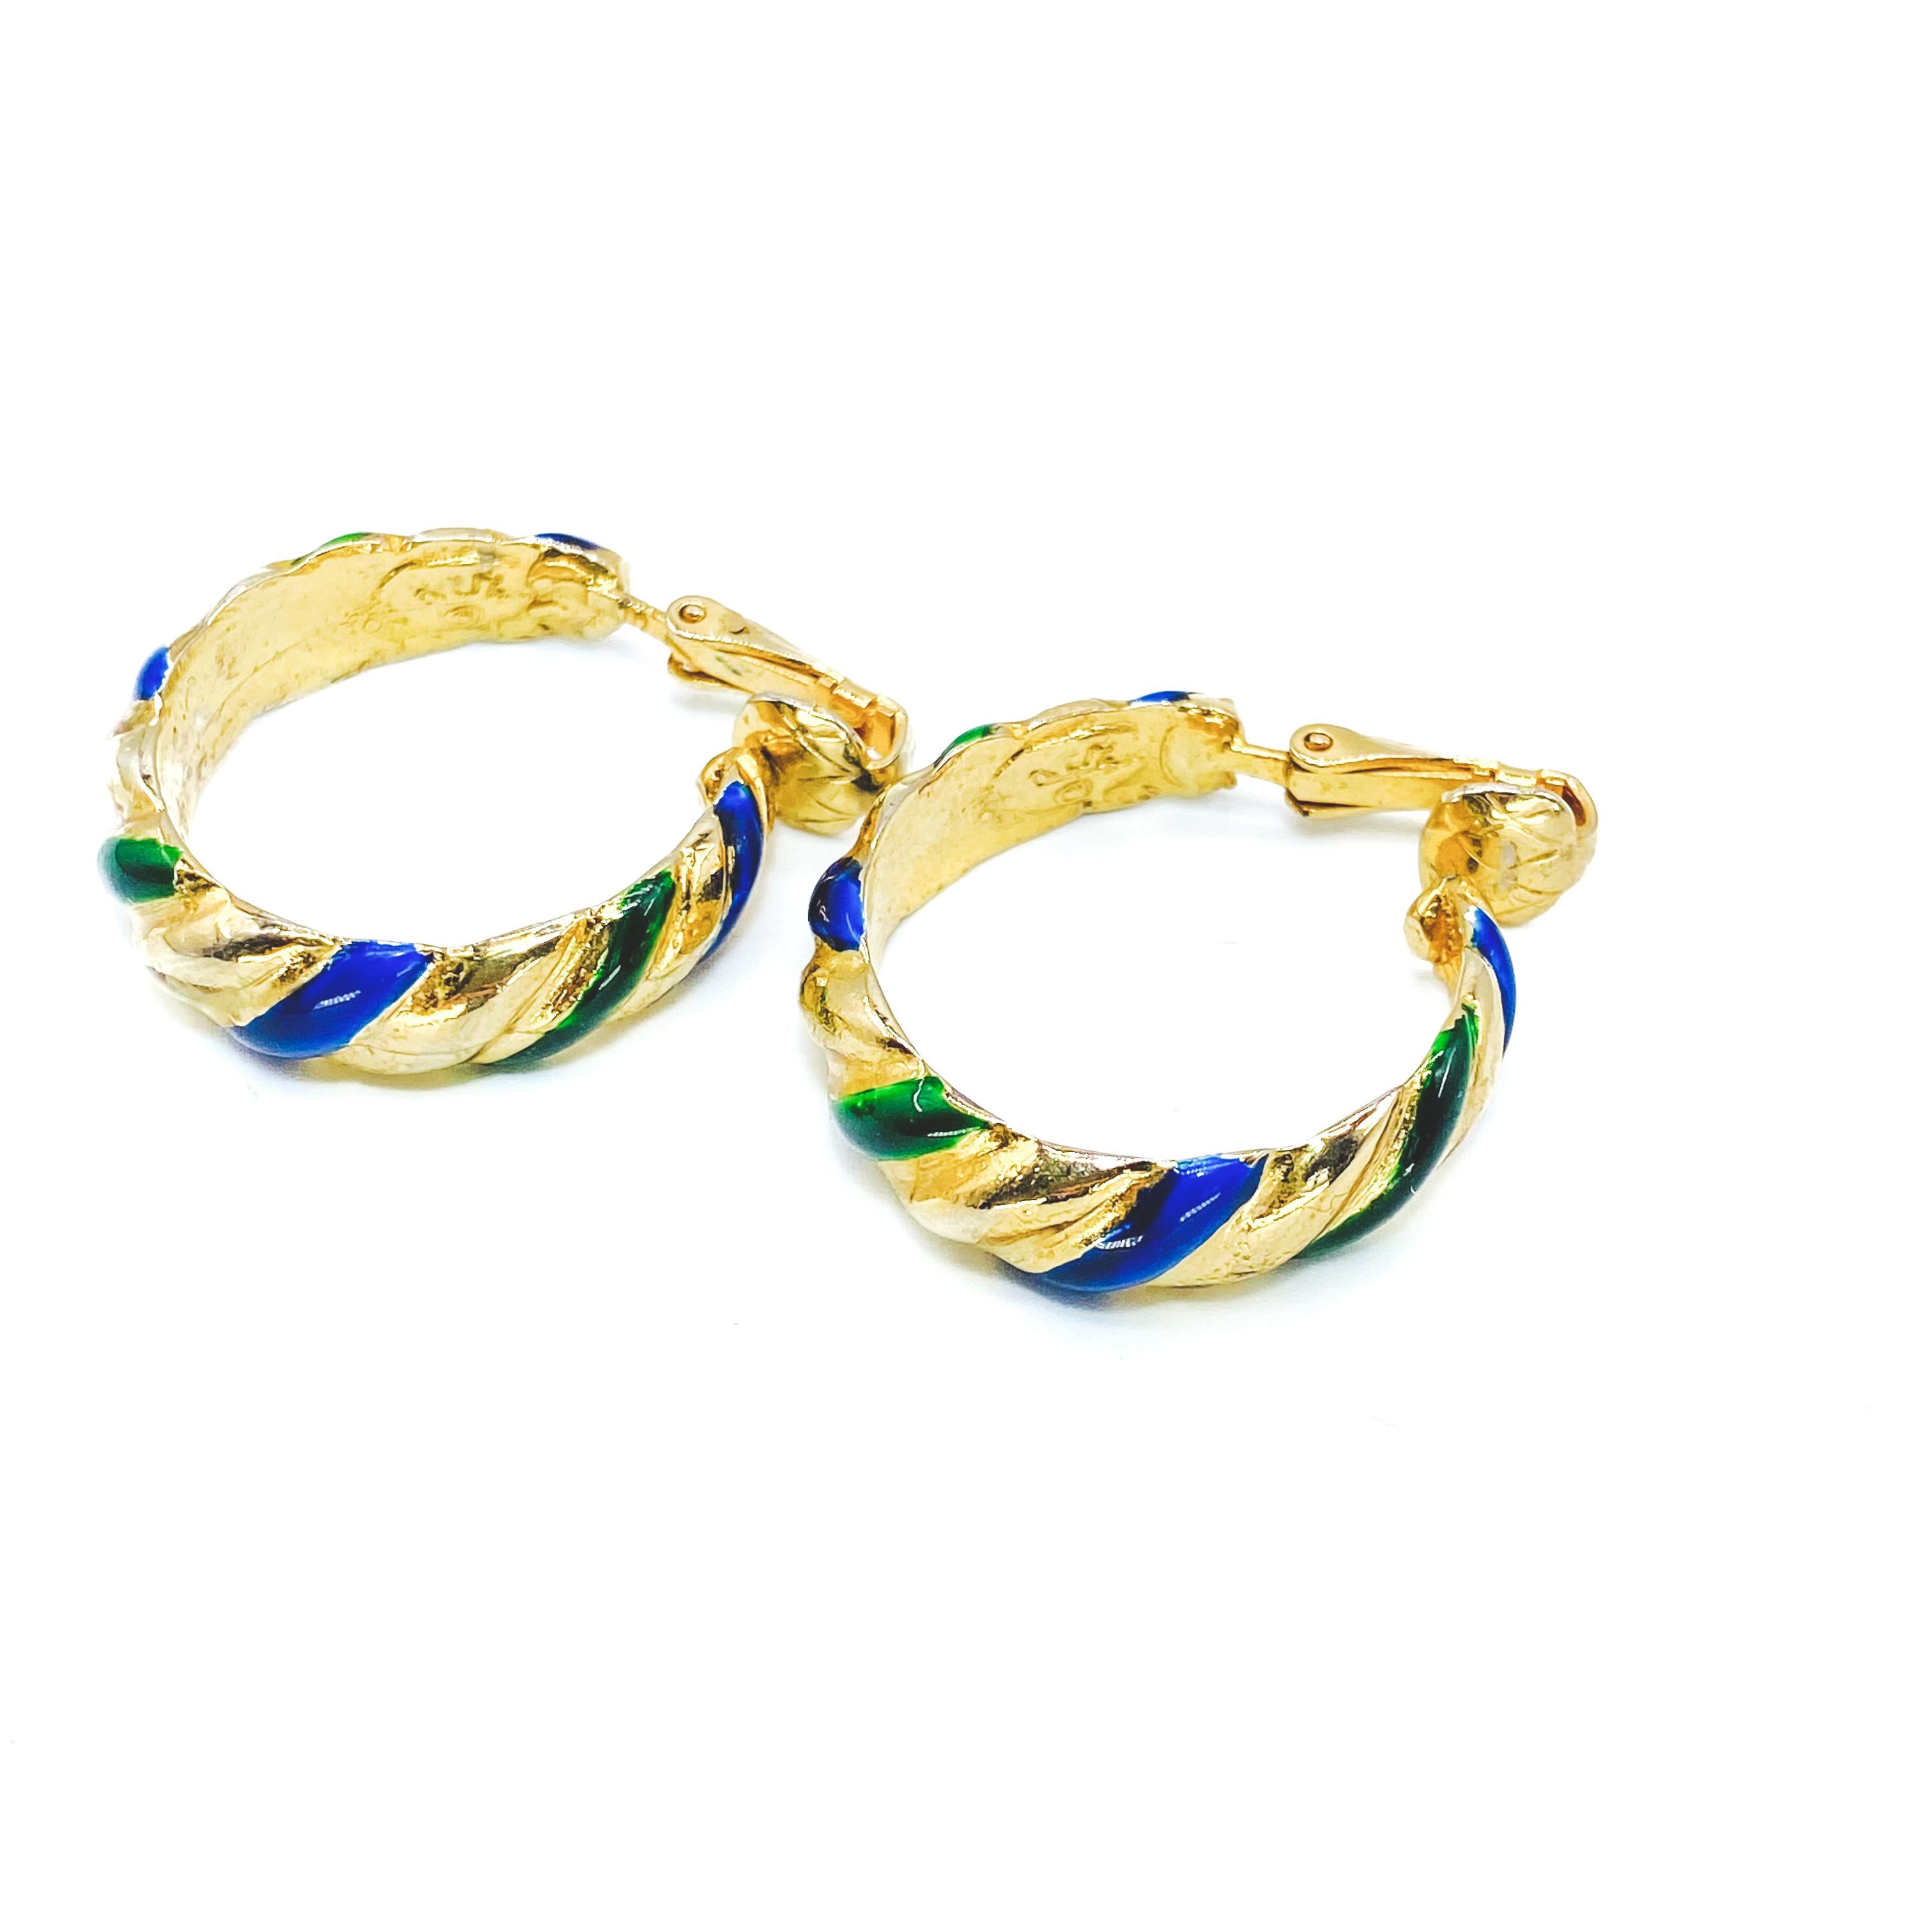 Kenneth Jay Lane 1980s Clip on Hoop Earrings

Detail
-Made in the USA in the 1980s
-Crafted from 1980s
-Inlaid with blue and green enamel

Size & Fit
-Approx 1 inch across 
-Strong clips

Authenticity & Condition
-Fully examined and authenticated by